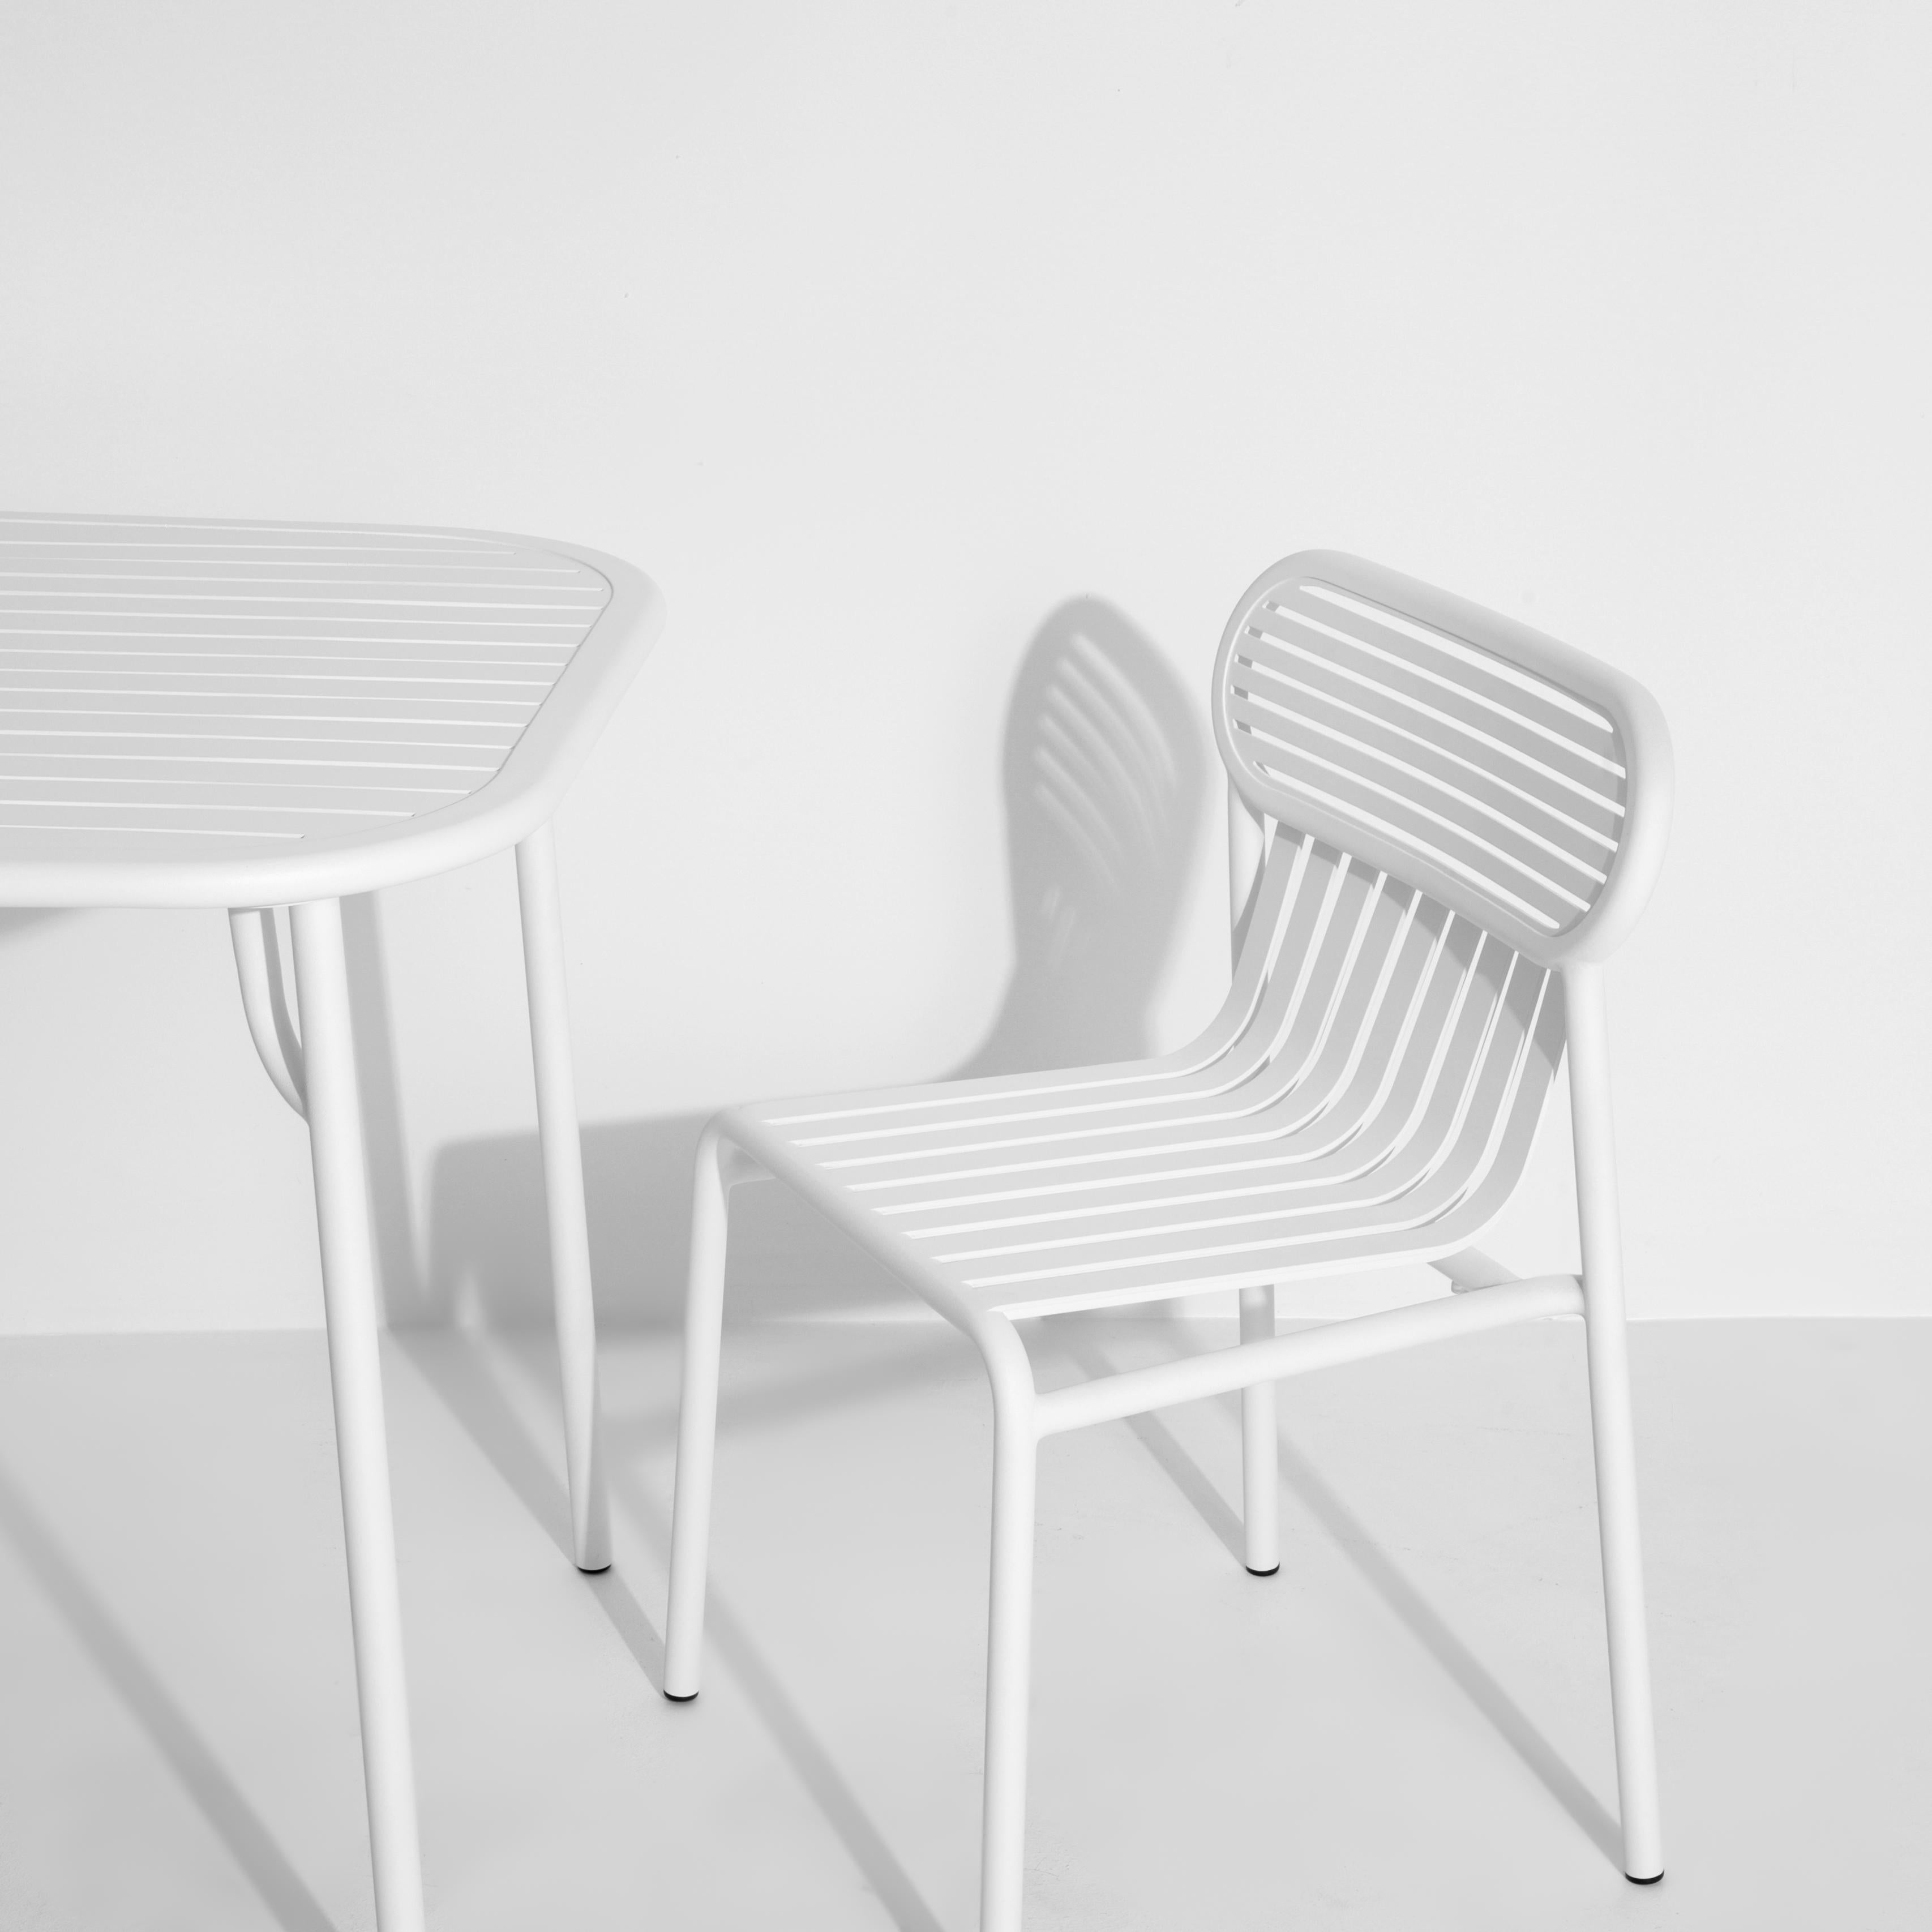 Petite Friture Week-End Chair in White Aluminium by Studio BrichetZiegler For Sale 4